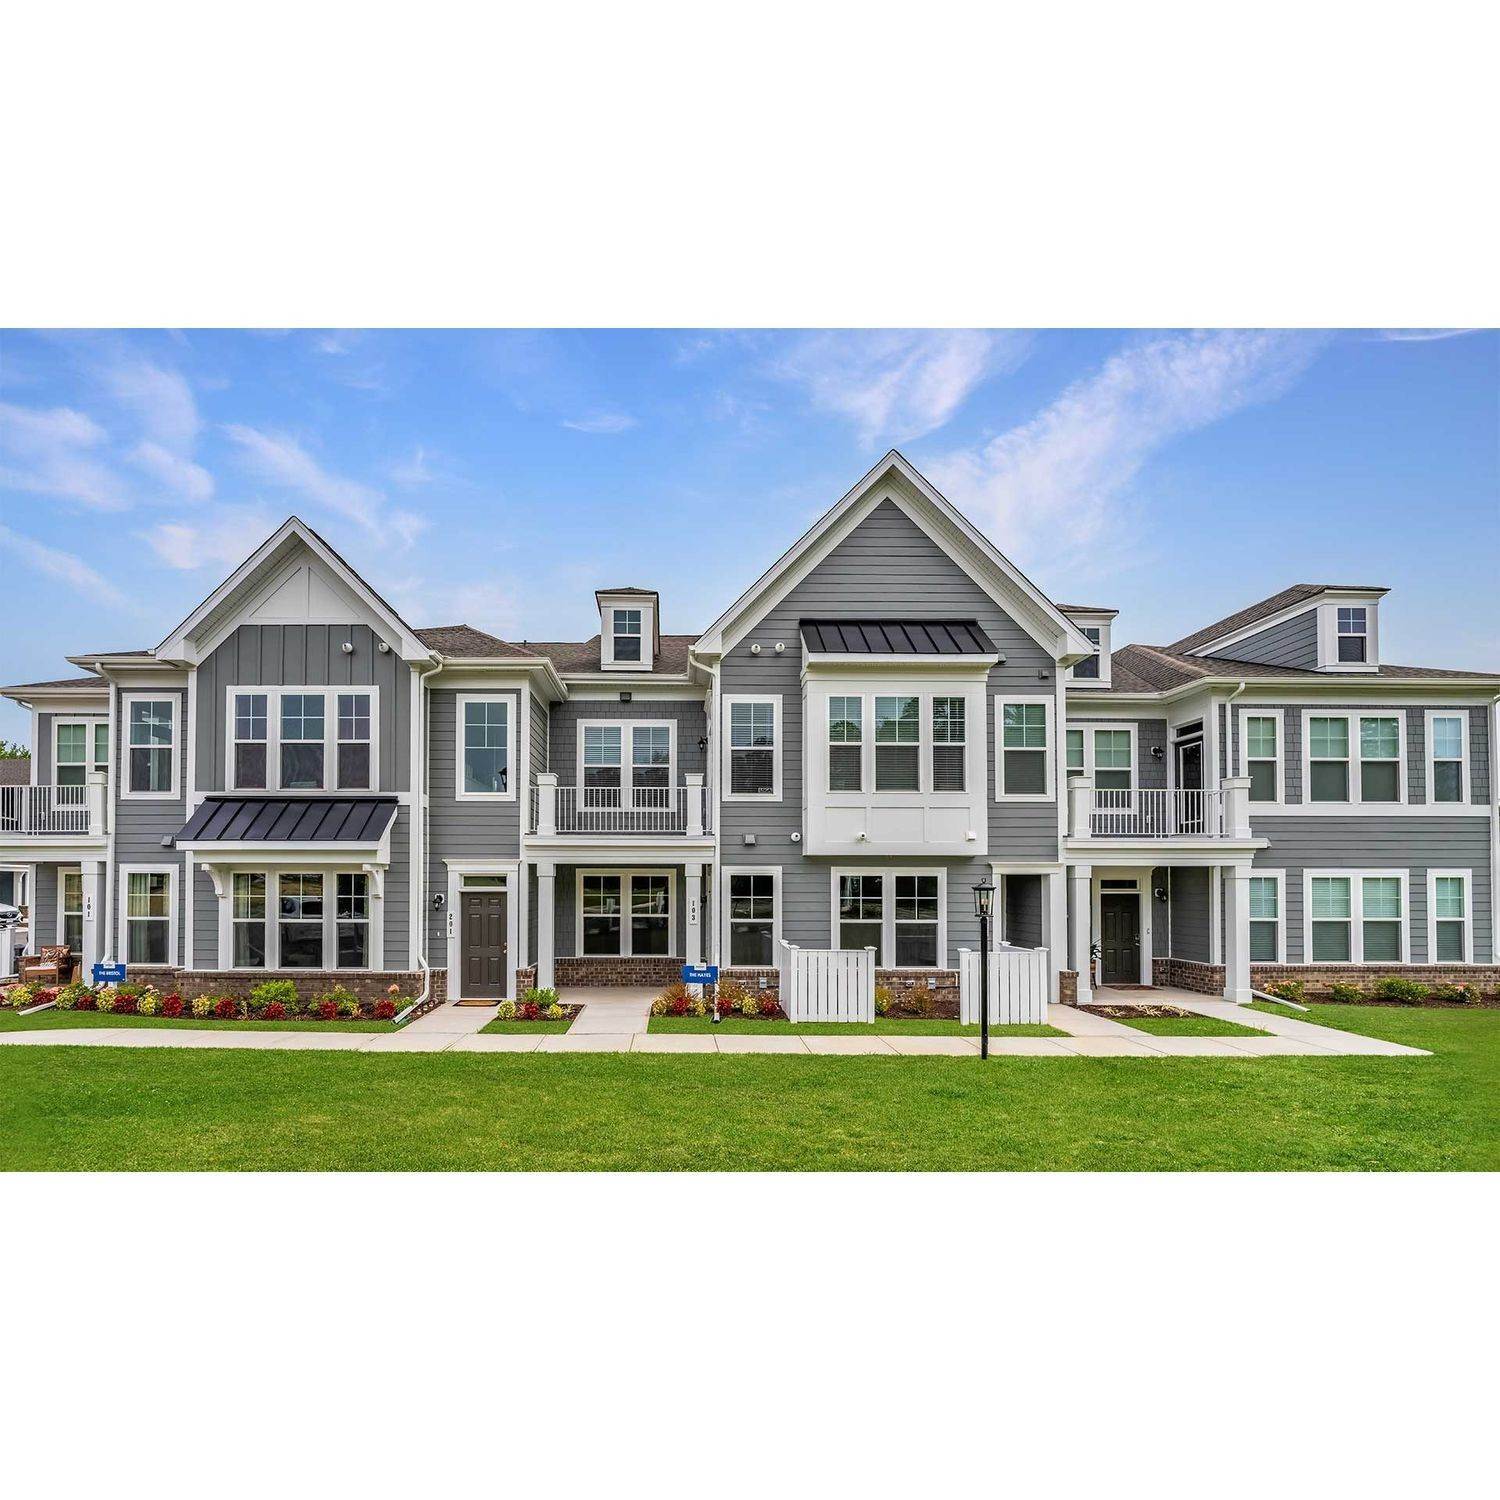 4. The Pointe at Twin Hickory prédio em 4605 Pouncey Tract Road, Glen Allen, VA 23059